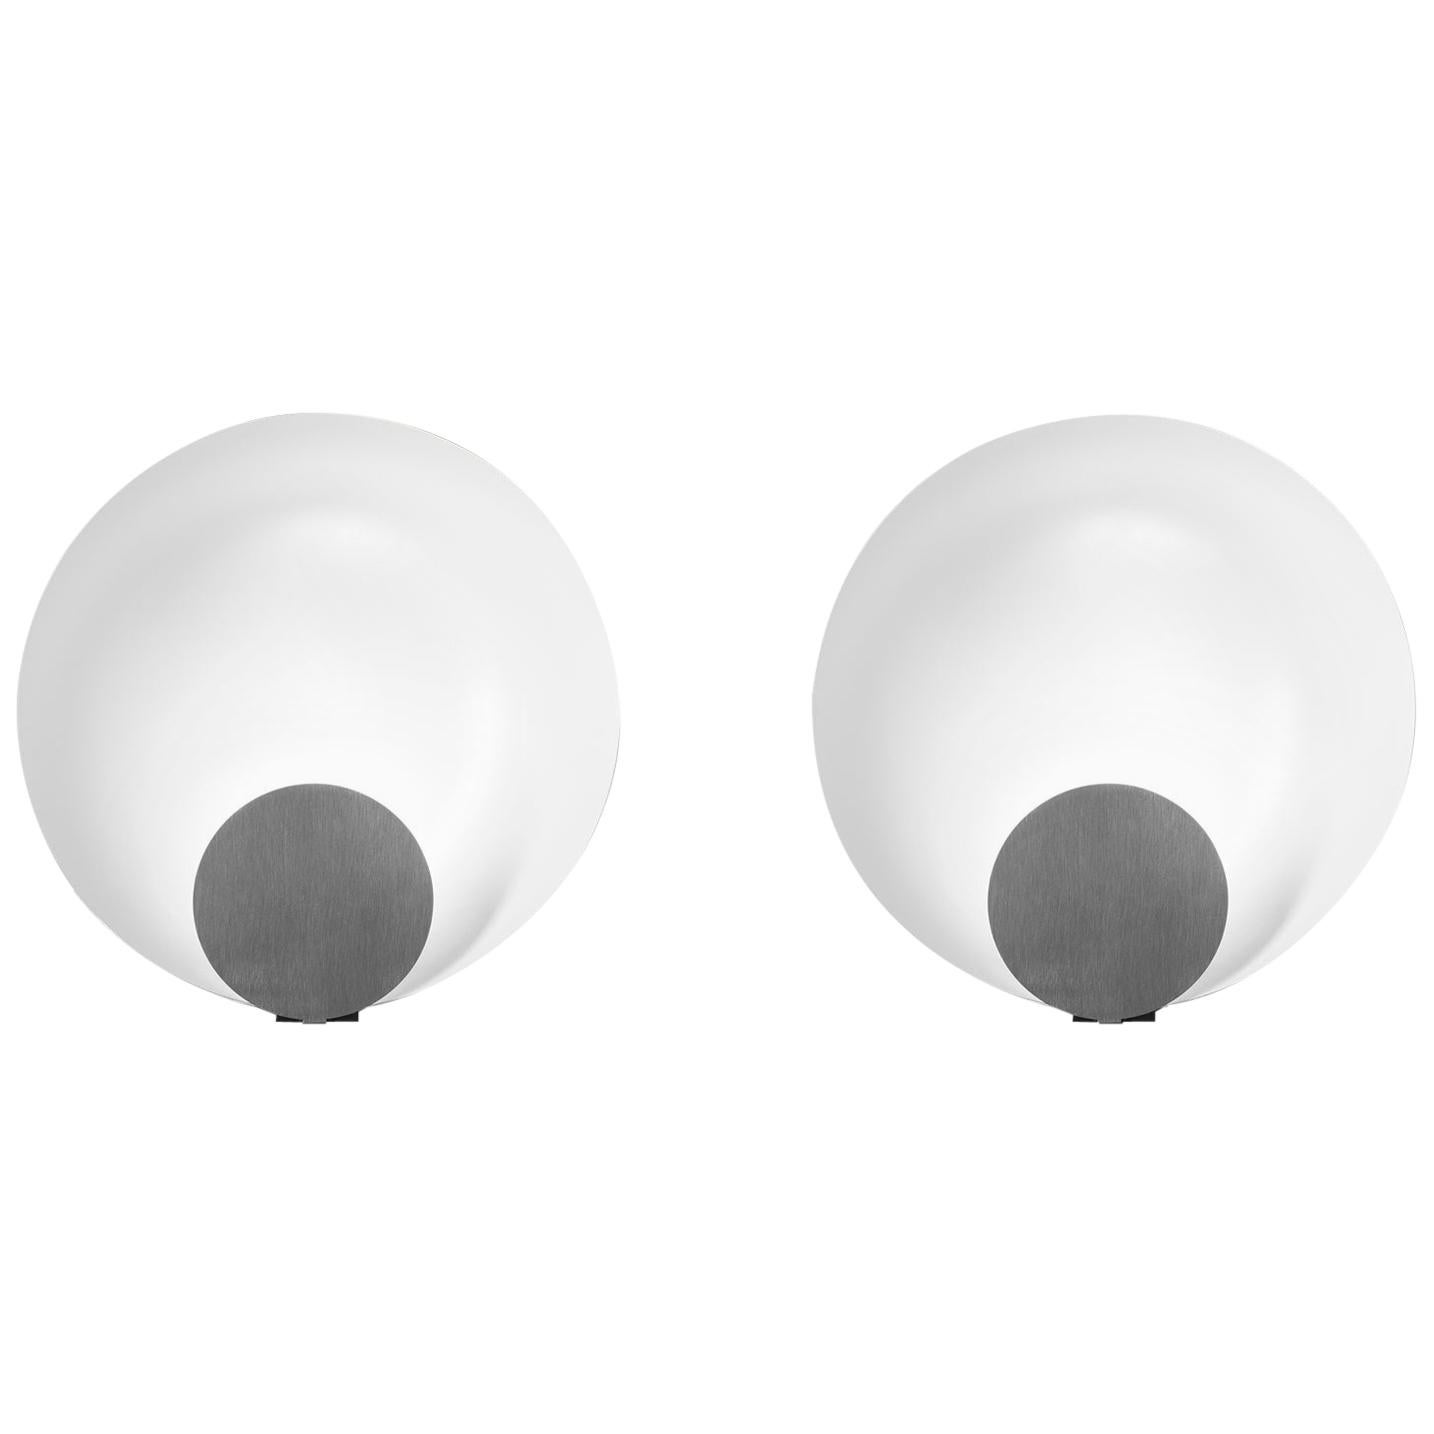 Set of Two Table Lamps 'Siro' Designed by Marta Perla, Manufactured by Oluce For Sale